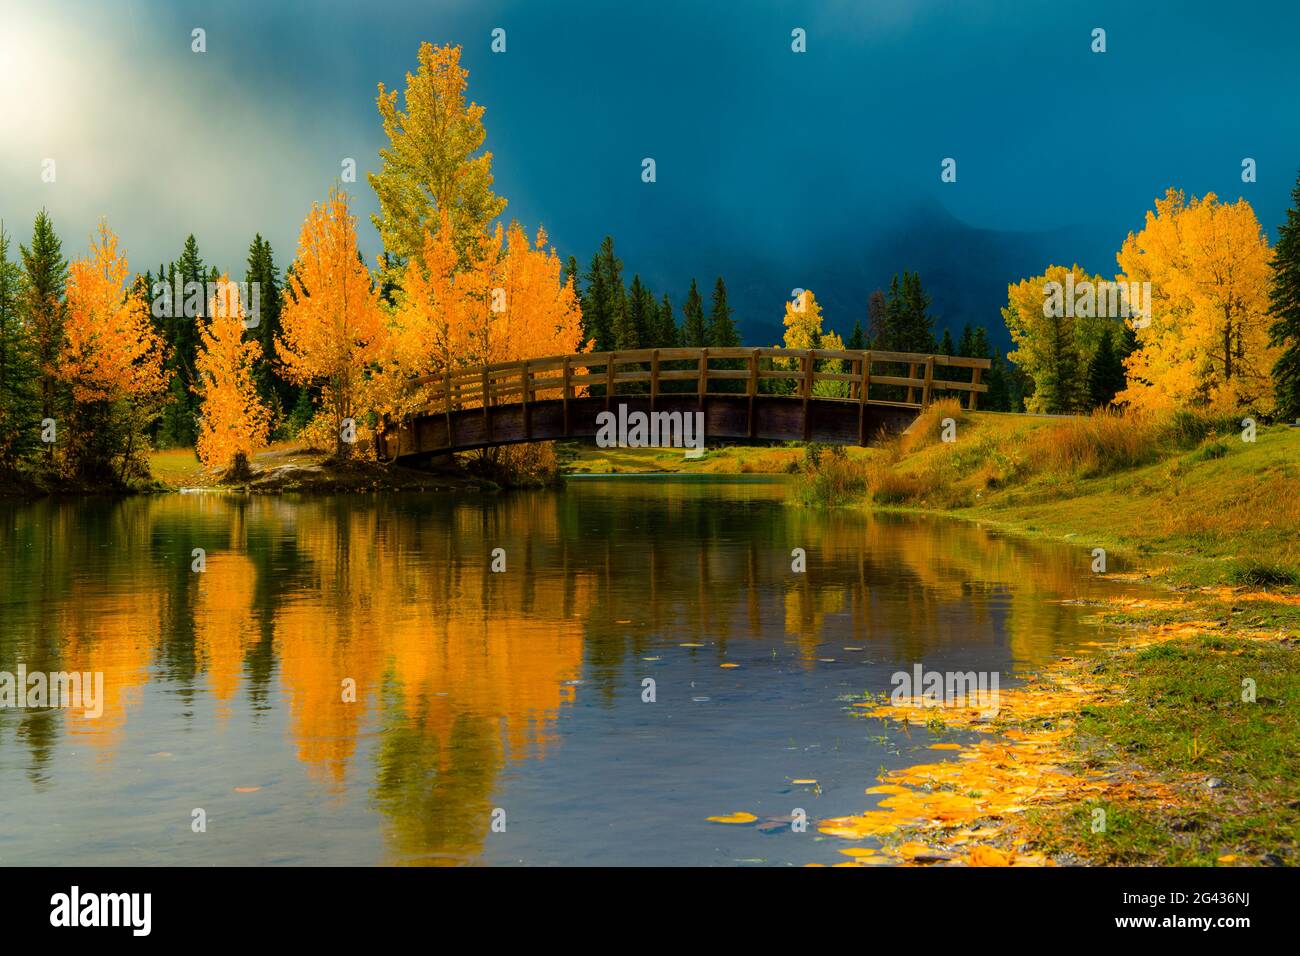 Landscape with bridge across lake and trees in autumn colors, Cascade Ponds, Banff National Park, Alberta, Canada Stock Photo